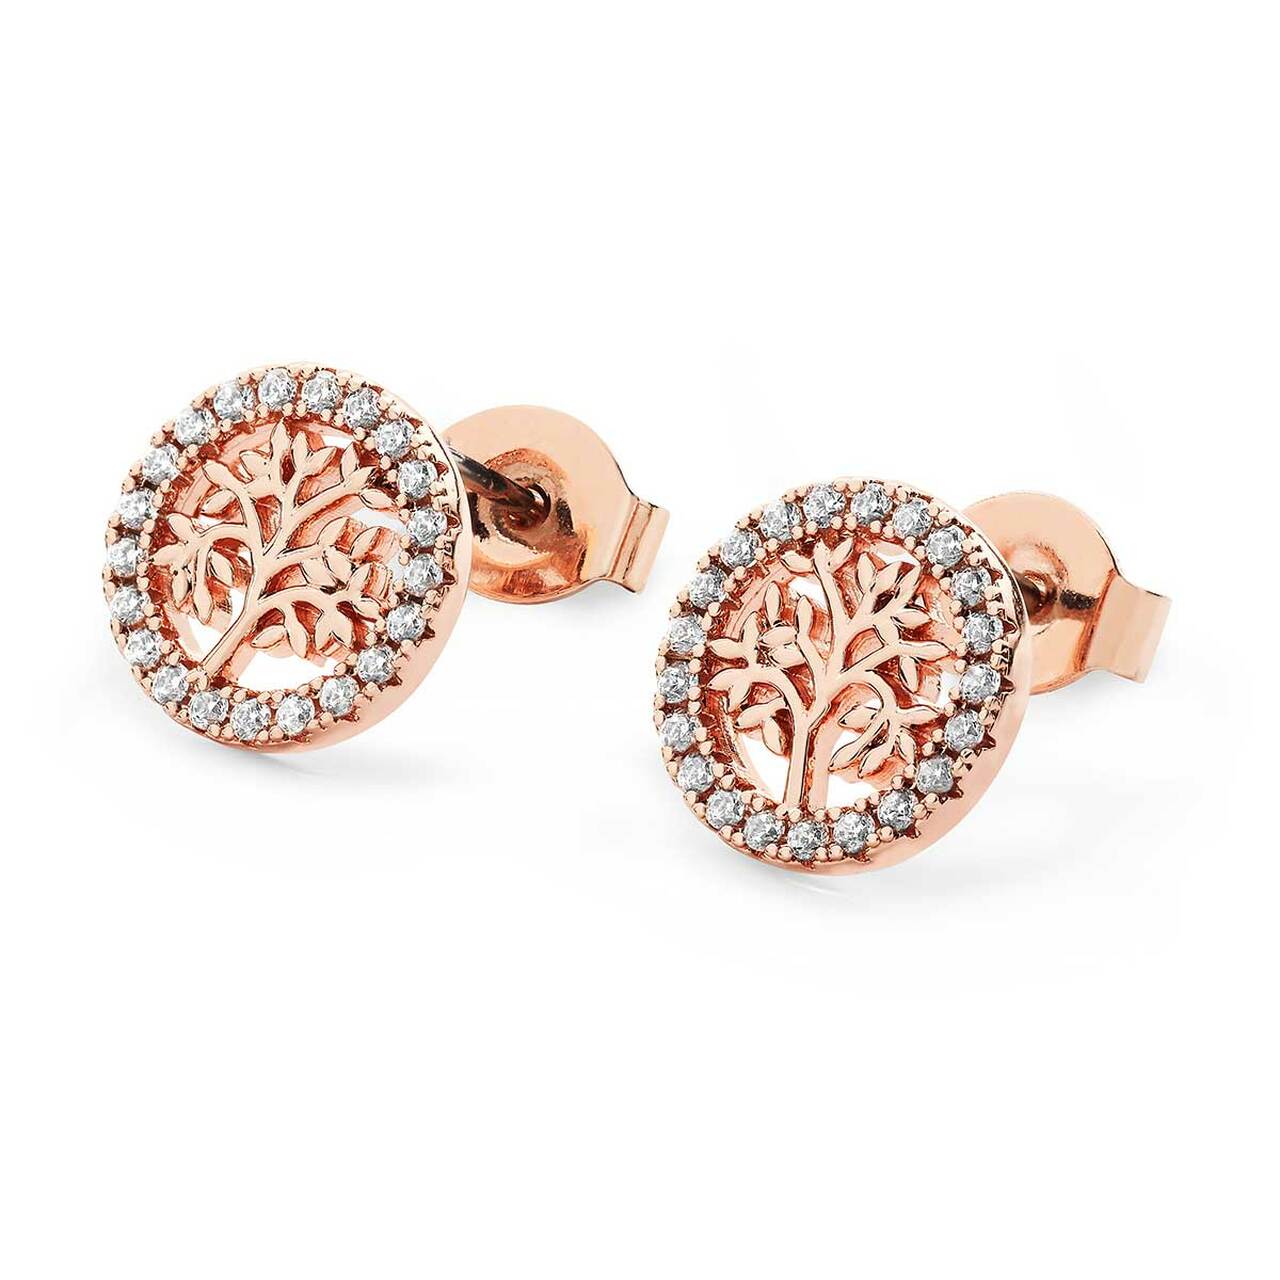 Tipperary Crystal Earrings- Rose Gold